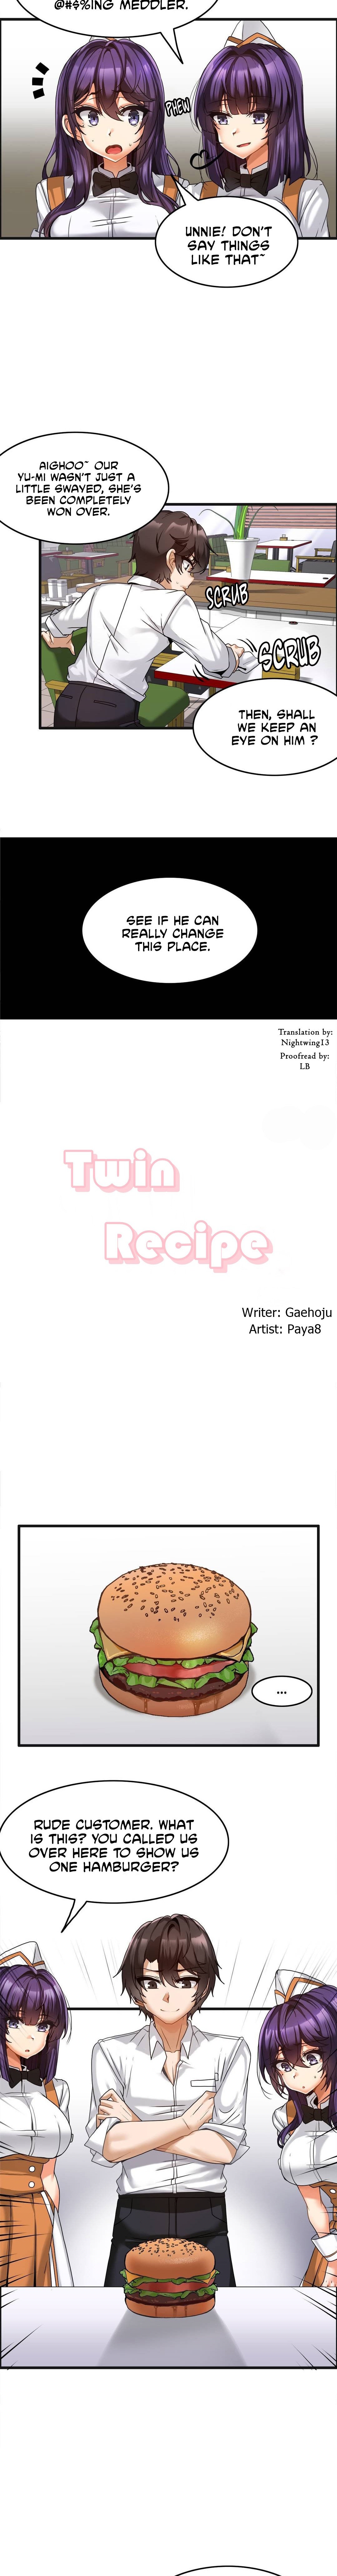 Twin Recipe - Chapter 6 Page 2